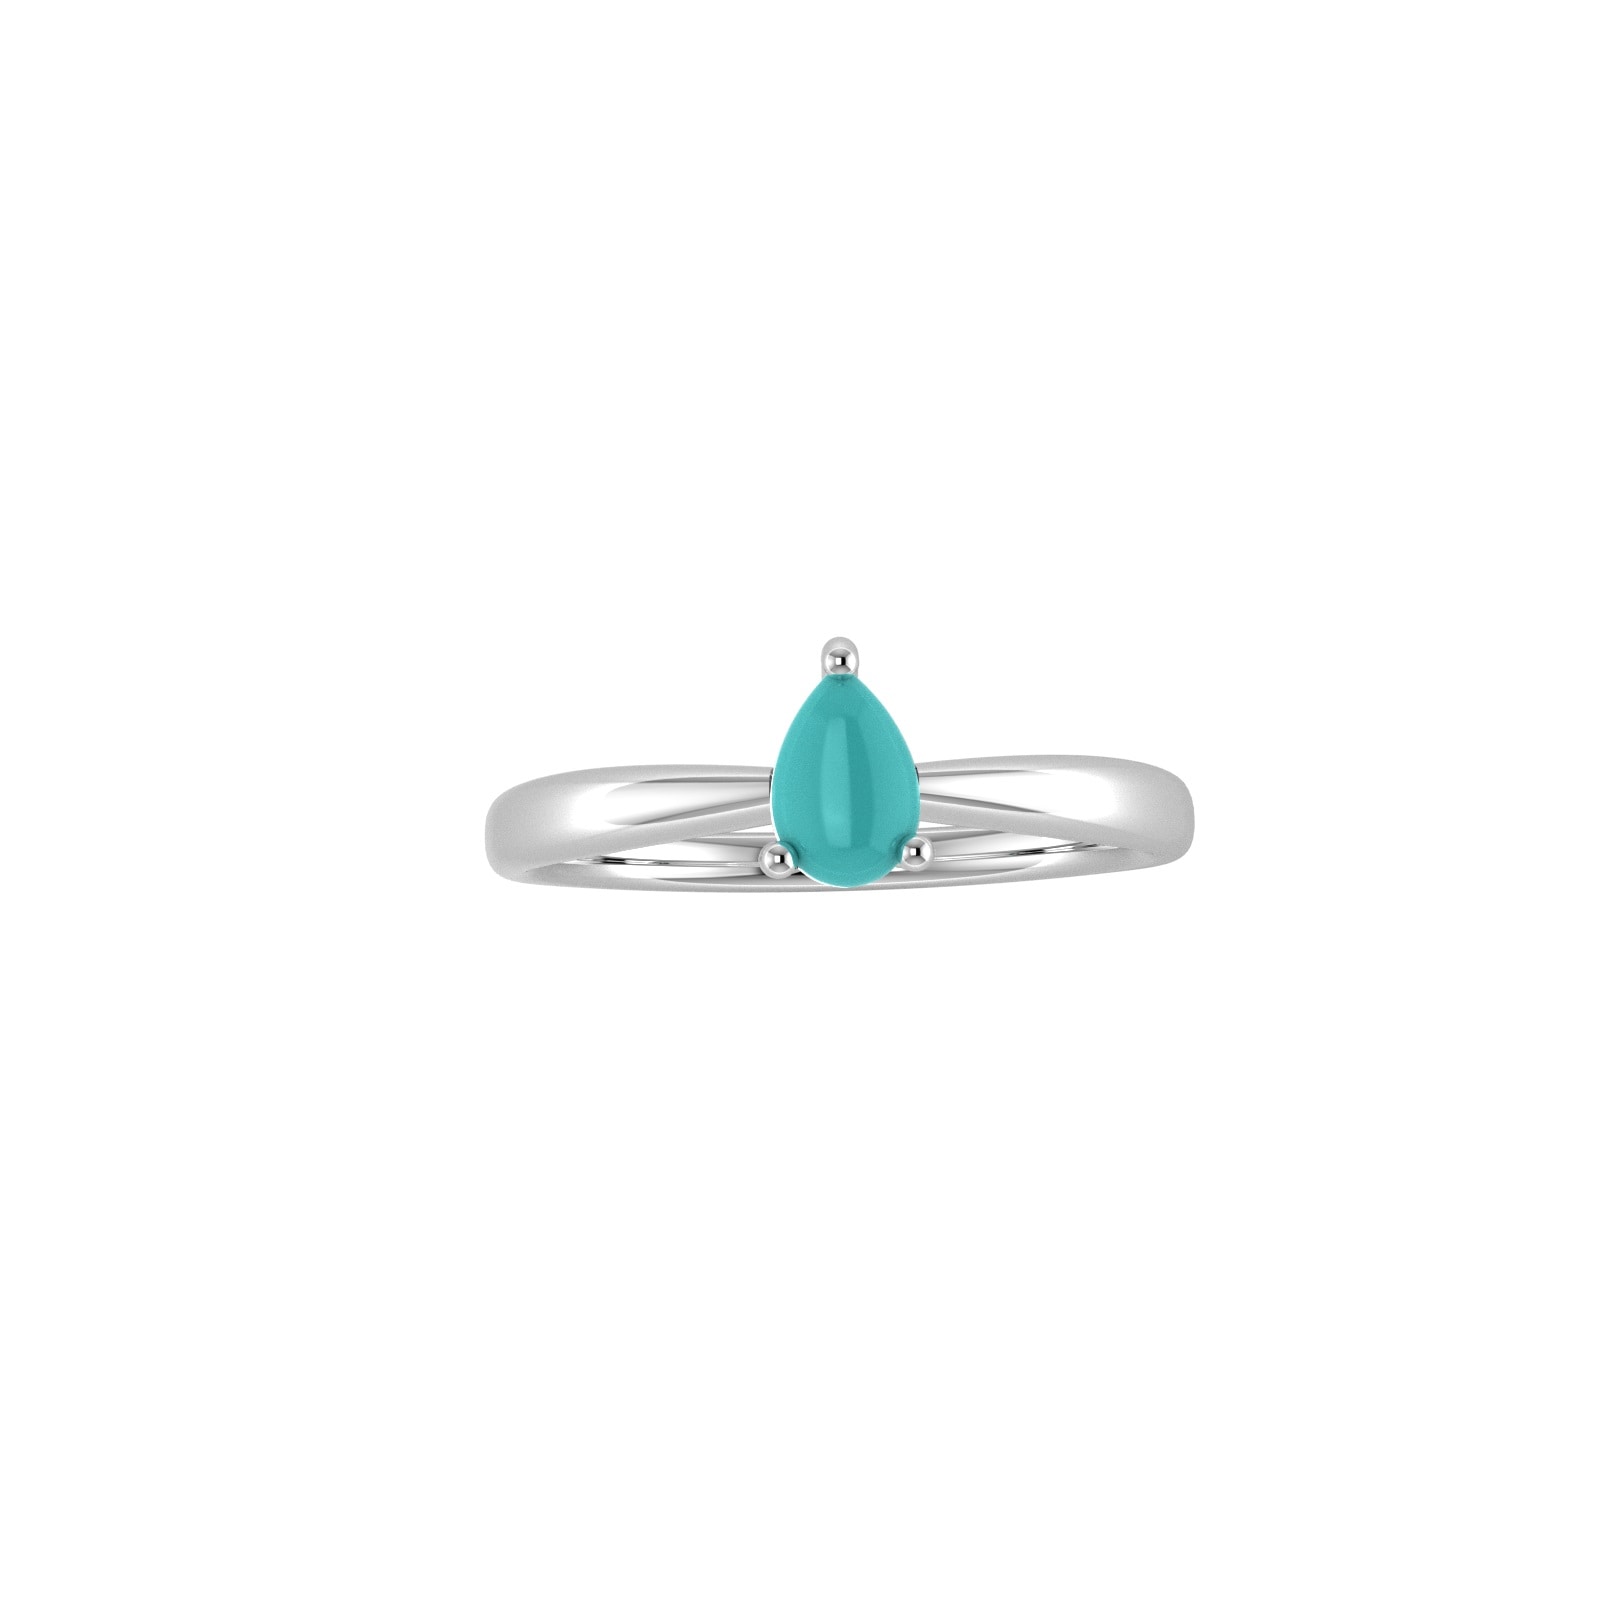 9ct White Gold 4 Claw Pear Cut Turquoise Ring